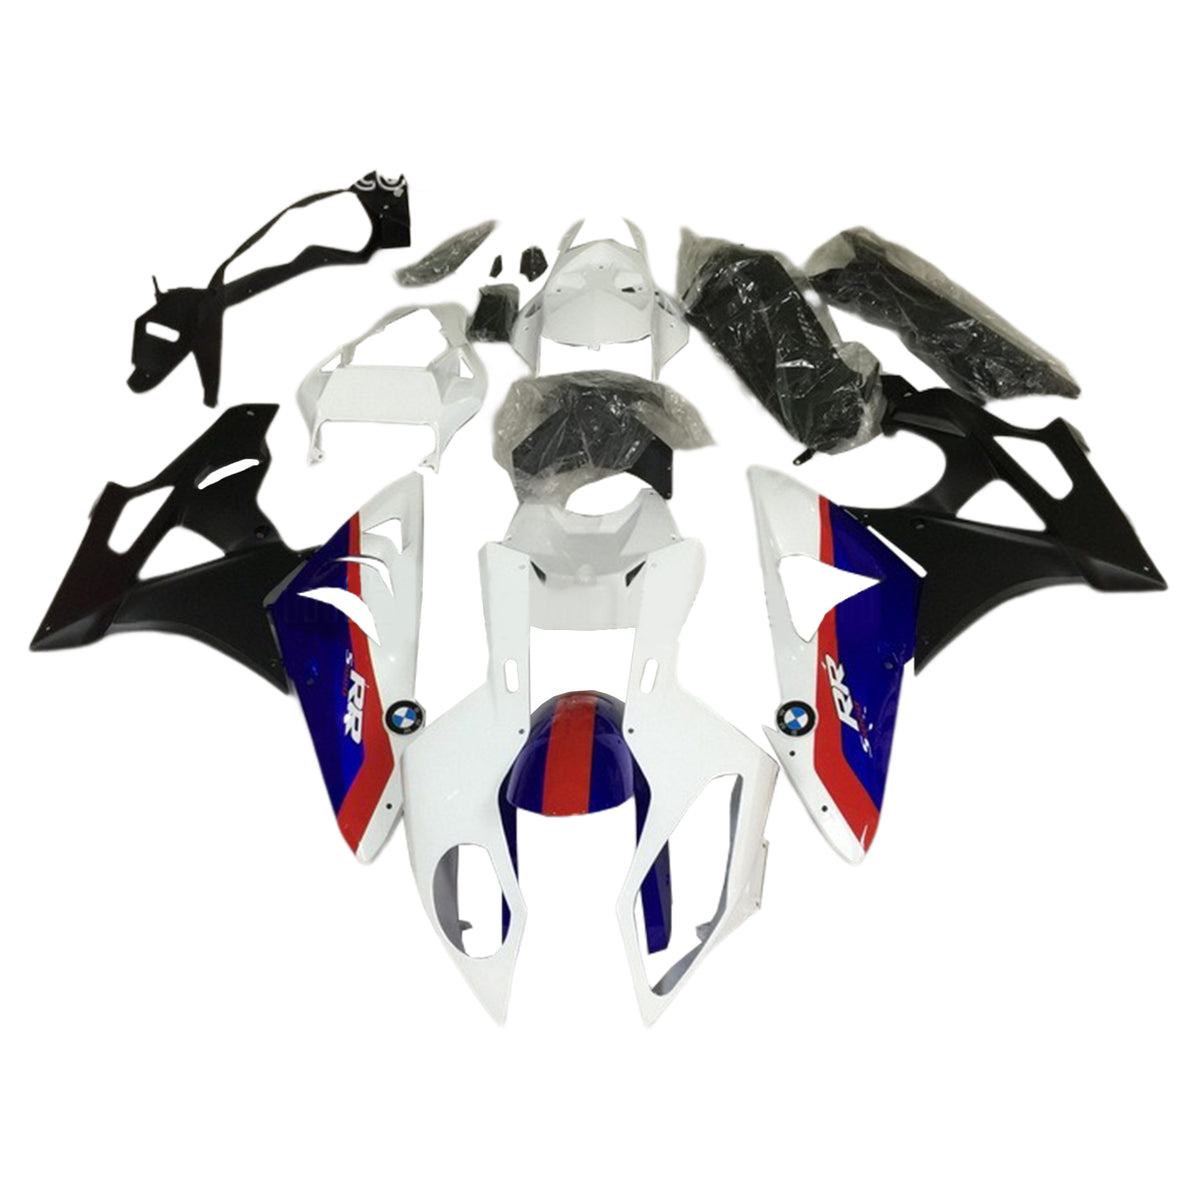 Amotopart Kit carena BMW S1000RR 2009-2014 Blue&amp;Red Style3